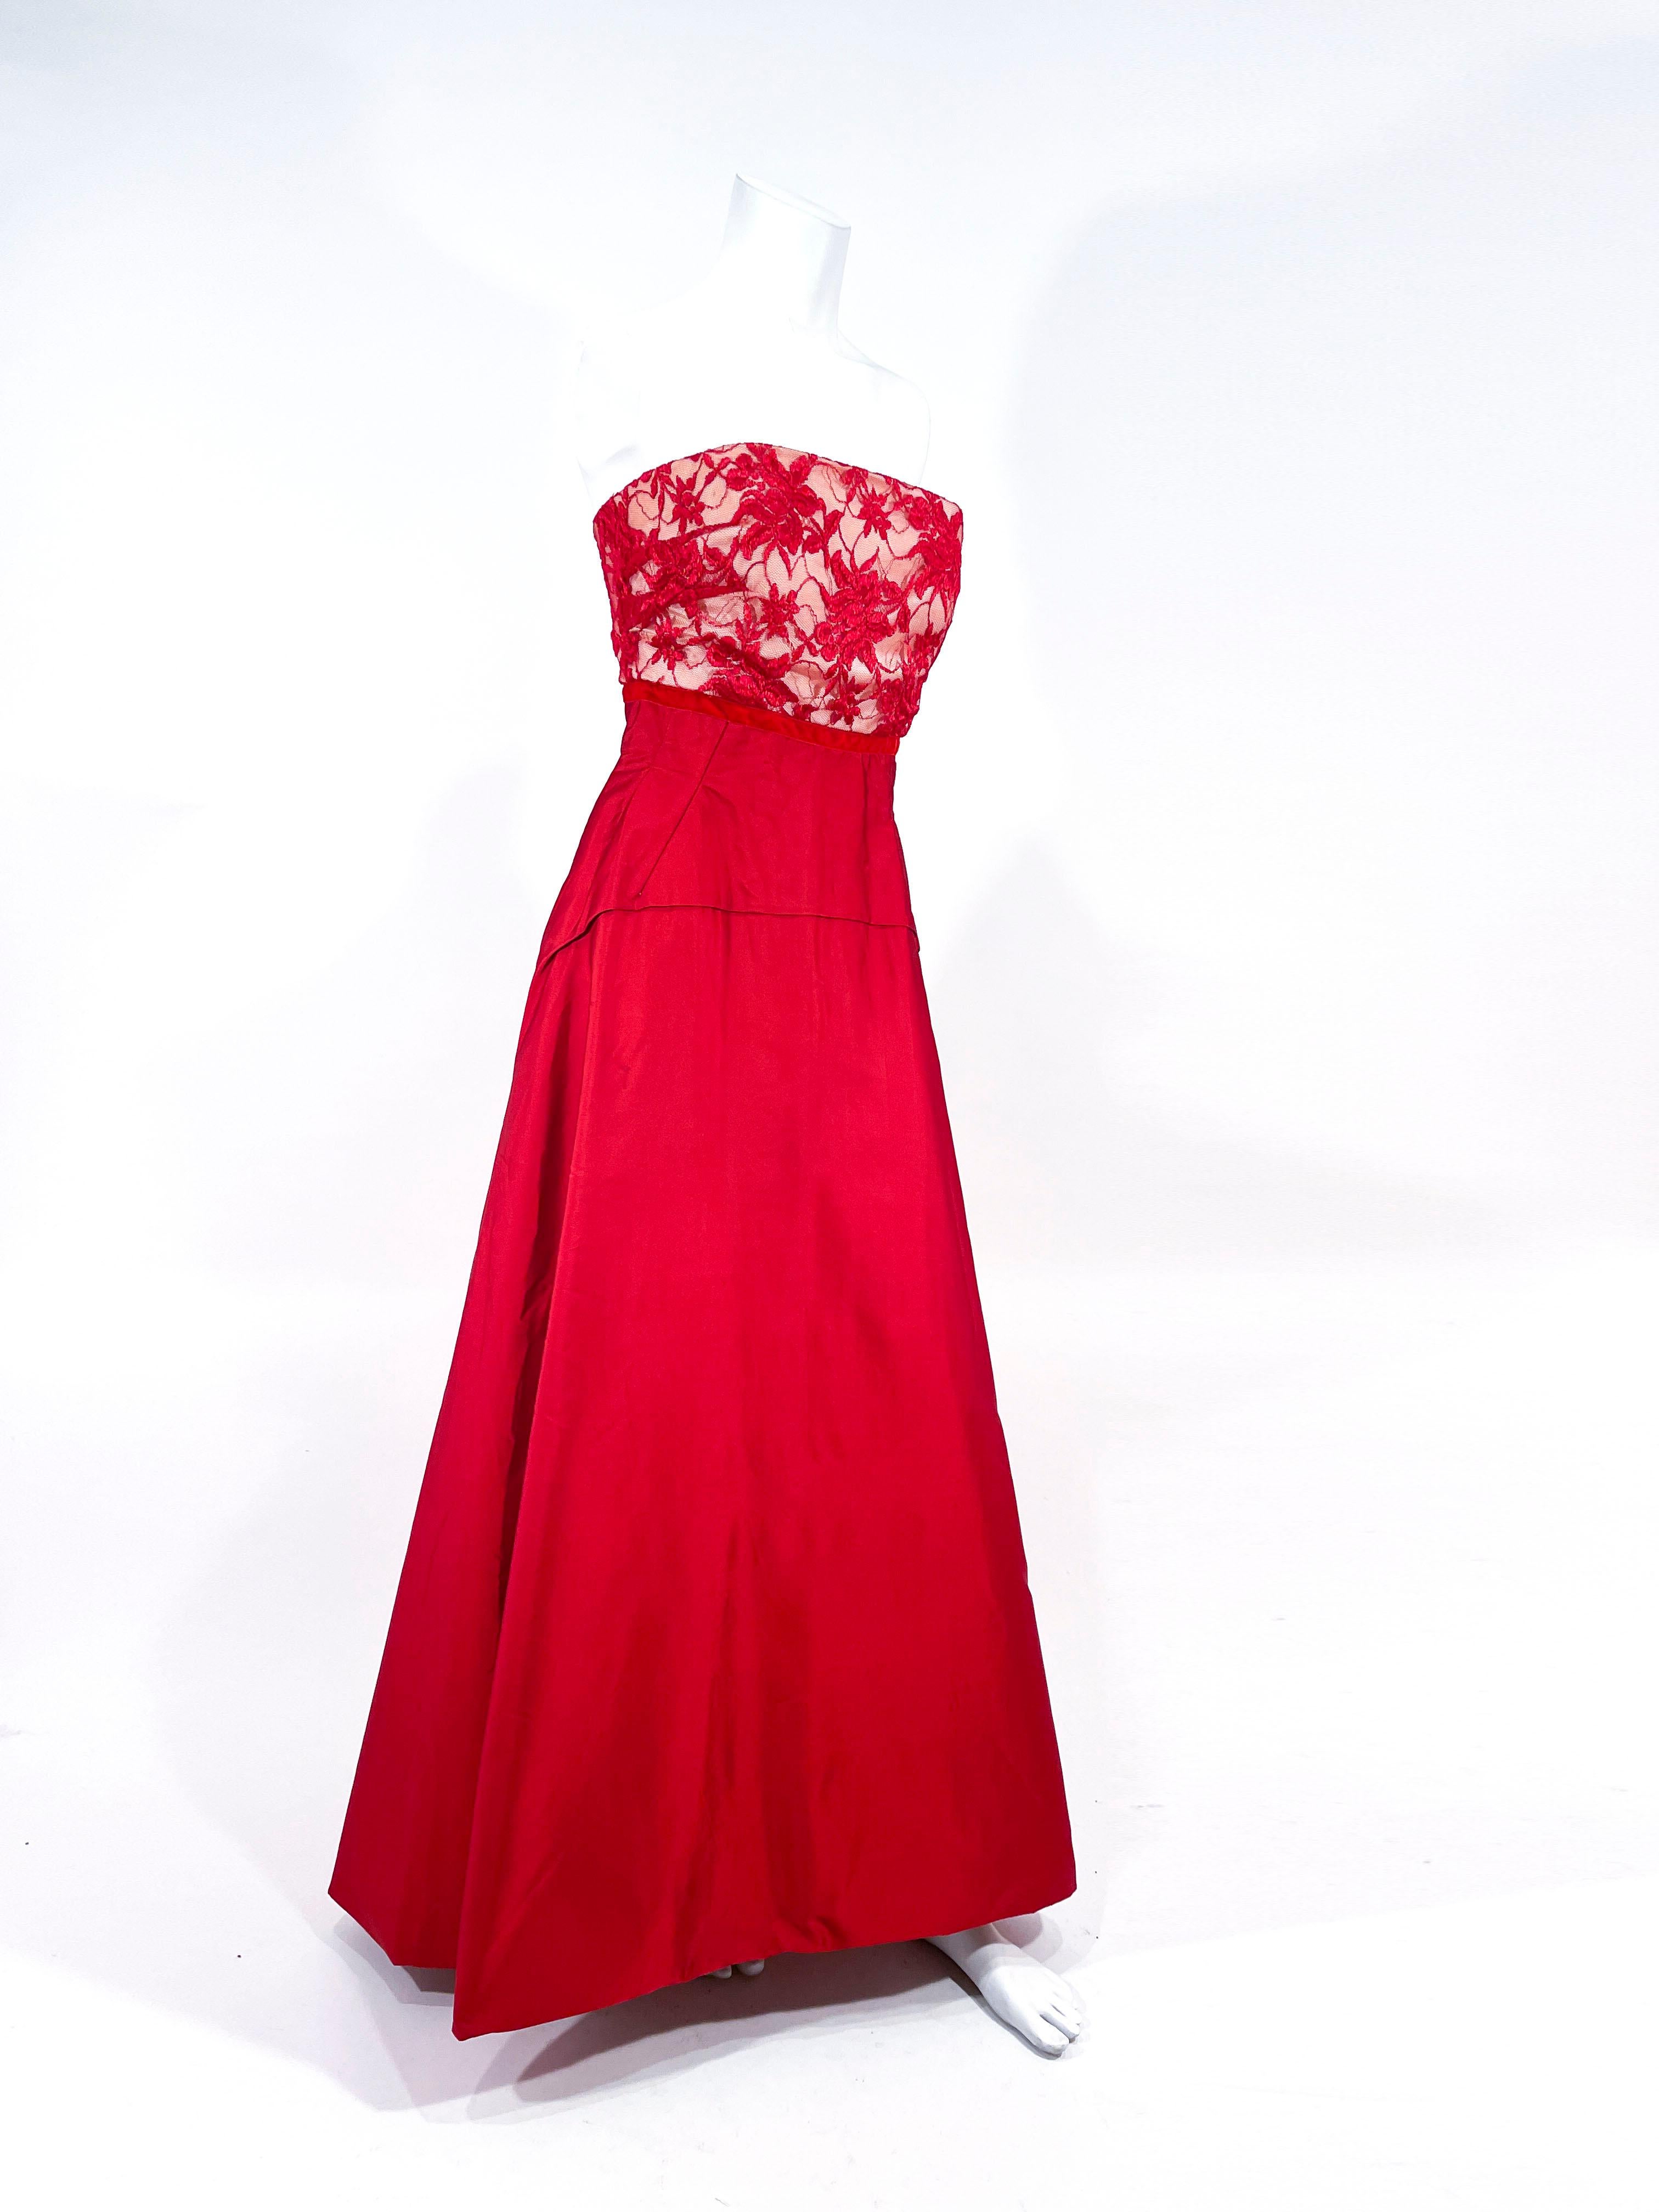 1960s Red duchess stain evening gown with a strapless bodice in a matching red illusion lace. The empire waistline has a red velvet trim and the skirt is entirely faced to give the skirt body and a structured shape. The back has a metal zippered